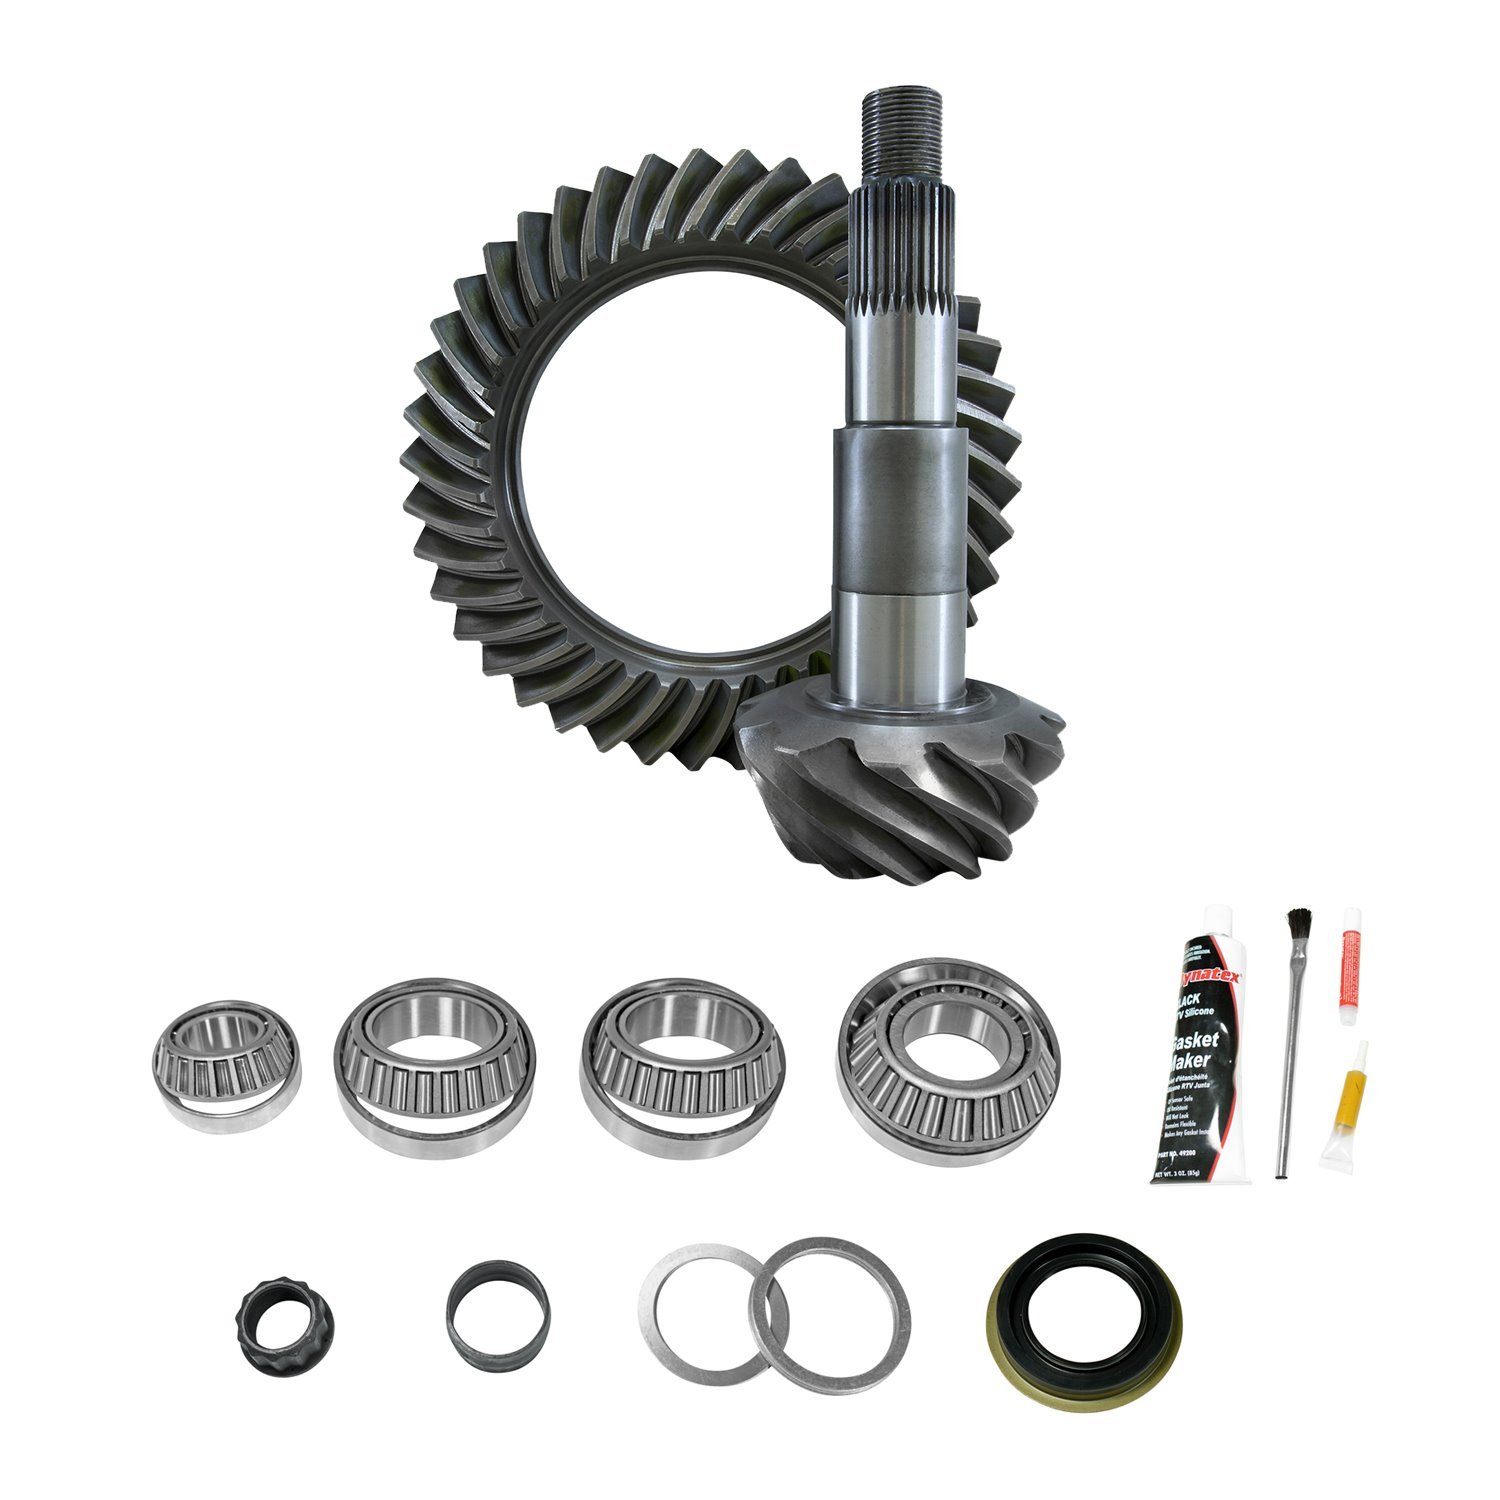 AAM115B1002 Ring & Pinion w/Installation Kit Bundle for 2010-2019 GM, Ram 2500, 3500 Trucks 11.5 AAM Differentials [4.11 Ratio]